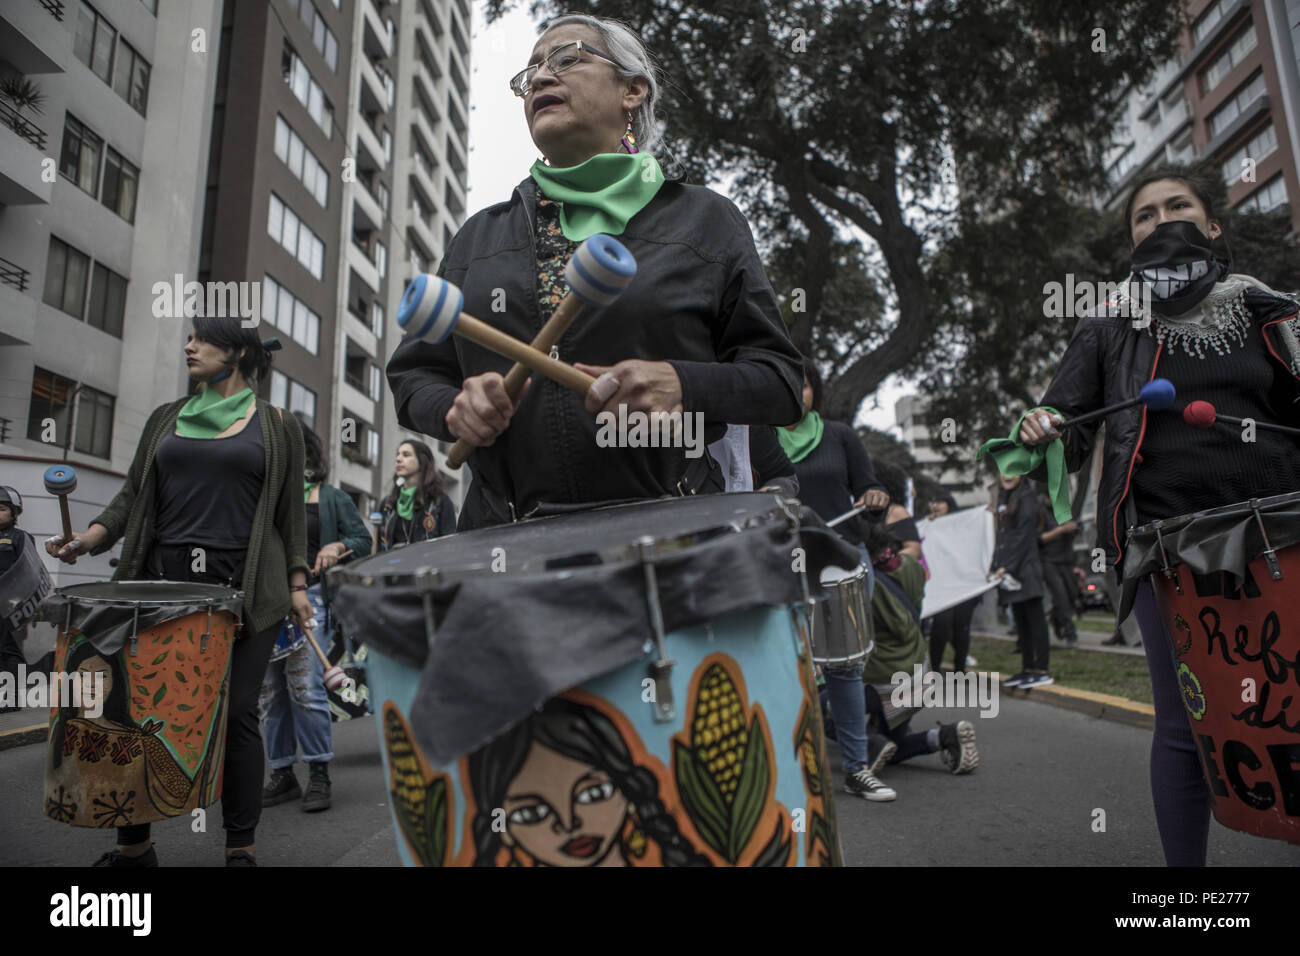 Lima, Peru. 11th Aug, 2018. Demonstrators march while paying music during a Ni Una Menos (Not One Less) rally in protest of gender based violence in Lima. Ni Una Menos (Not One Less) demands that women should be protected from violent deaths at the hands of men in Peru. Credit: Guillermo Gutierrez/SOPA Images/ZUMA Wire/Alamy Live News Stock Photo